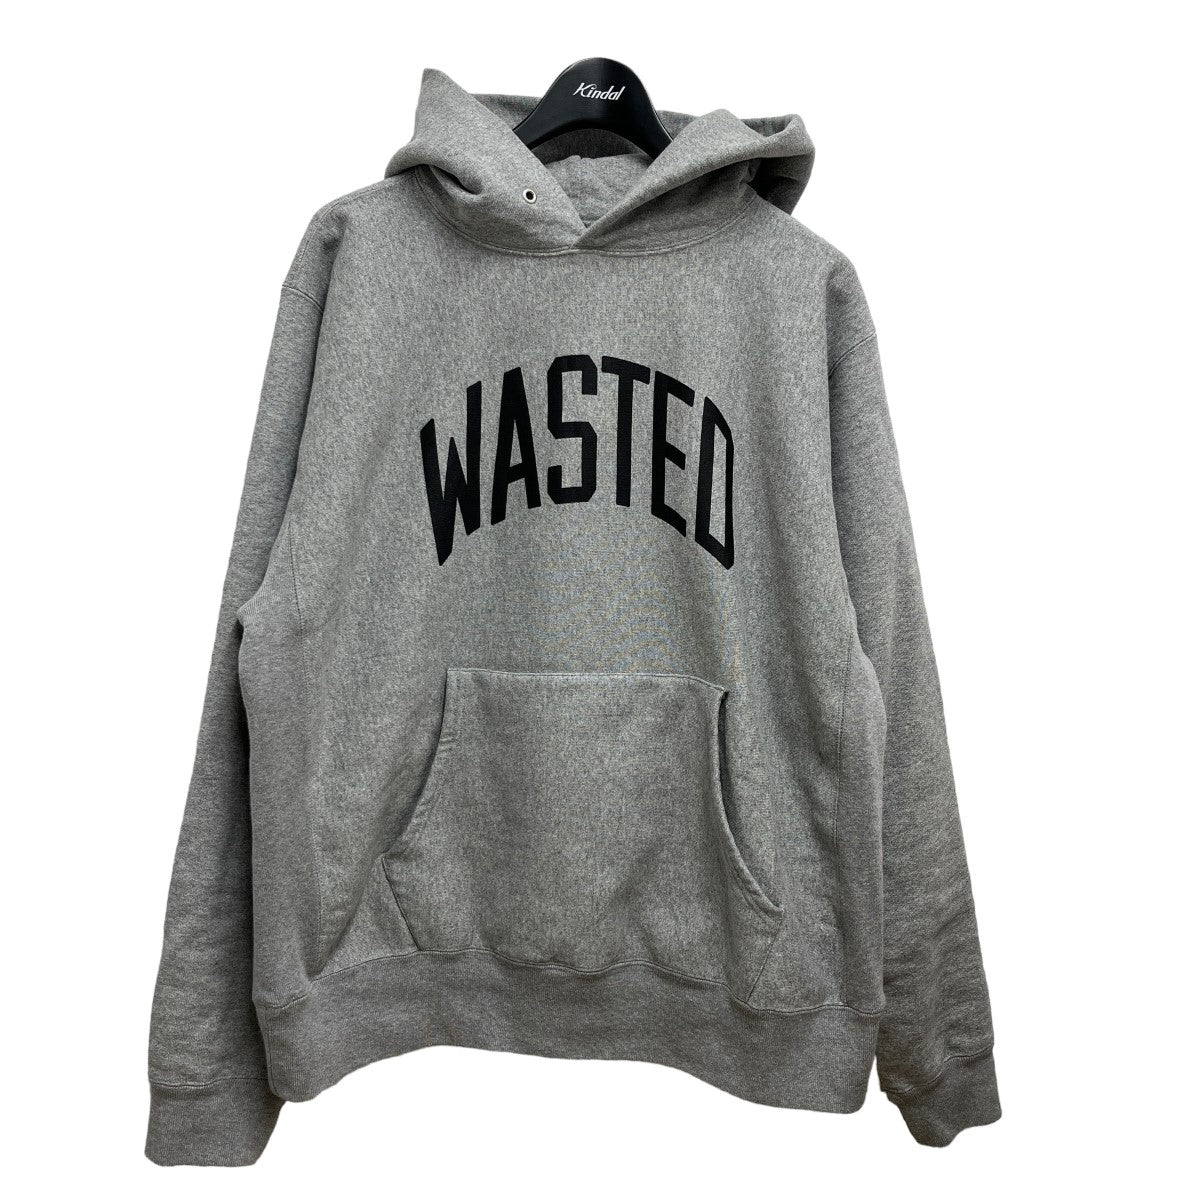 Wasted Youth(ウェイステッド ユース) HEAVY WEIGHT HOODIE パーカー 